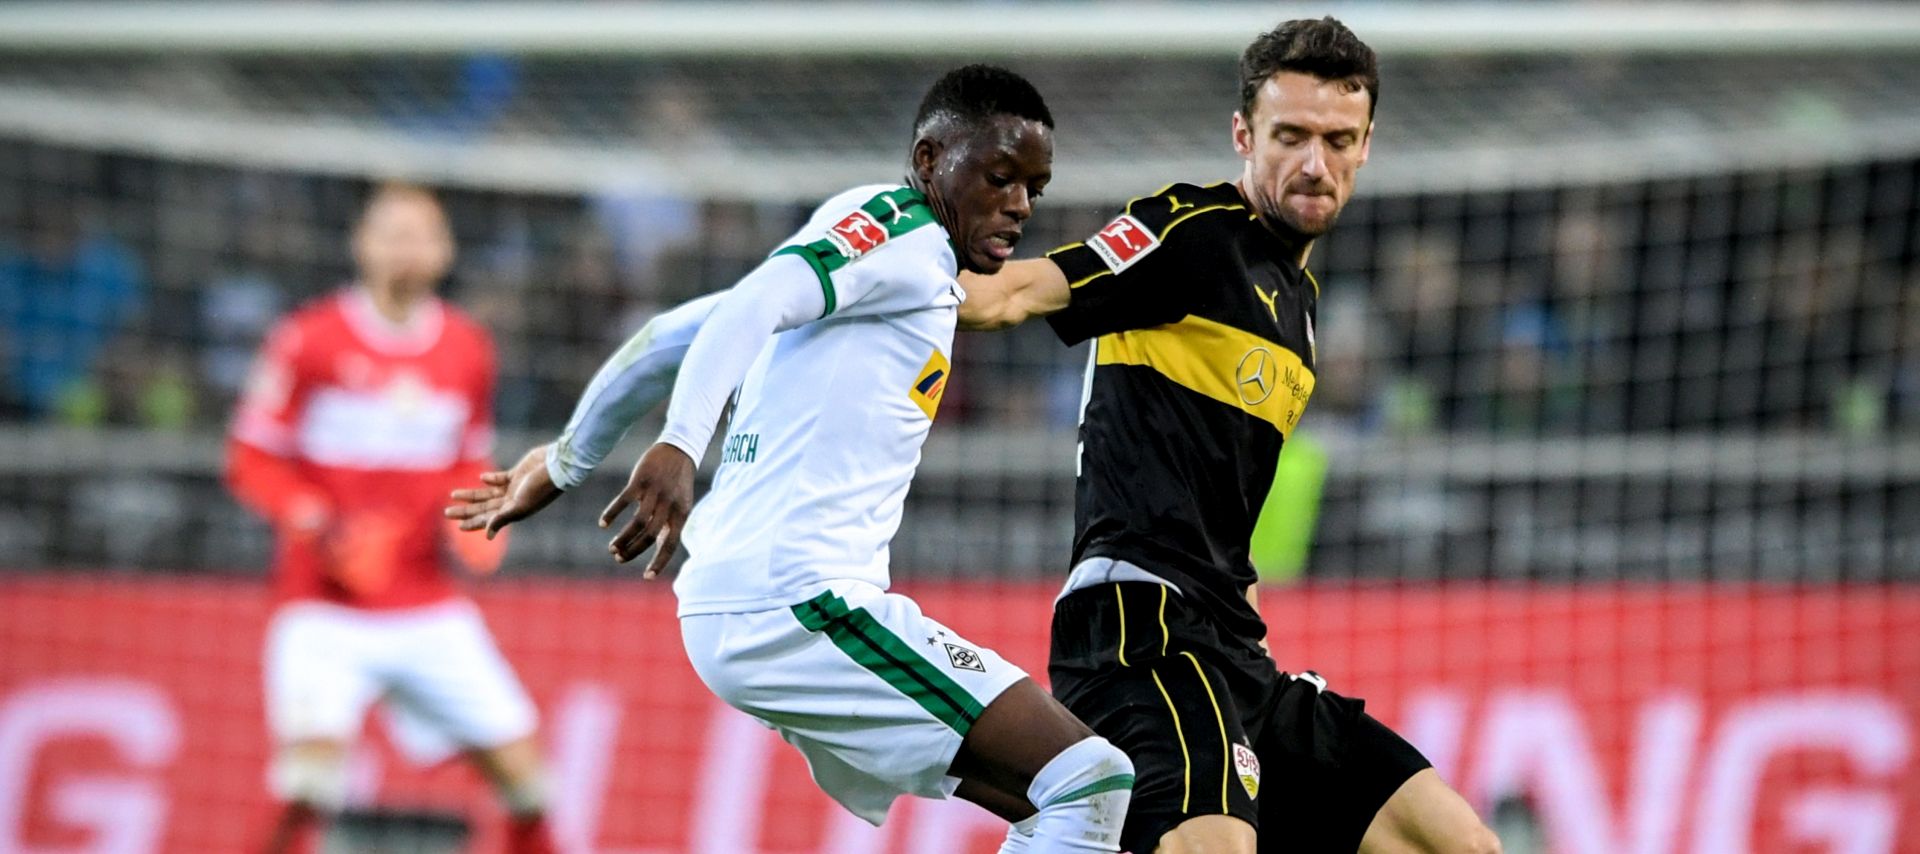 epa07220080 Moenchengladbach's Denis Zakaria (L) in action against Stuttgart's Christian Gentner (R) during the German Bundesliga soccer match between Borussia Moenchengladbach and VfB Stuttgart in Moenchengladbach, Germany, 09 December 2018.  EPA/SASCHA STEINBACH CONDITIONS - ATTENTION: The DFL regulations prohibit any use of photographs as image sequences and/or quasi-video.